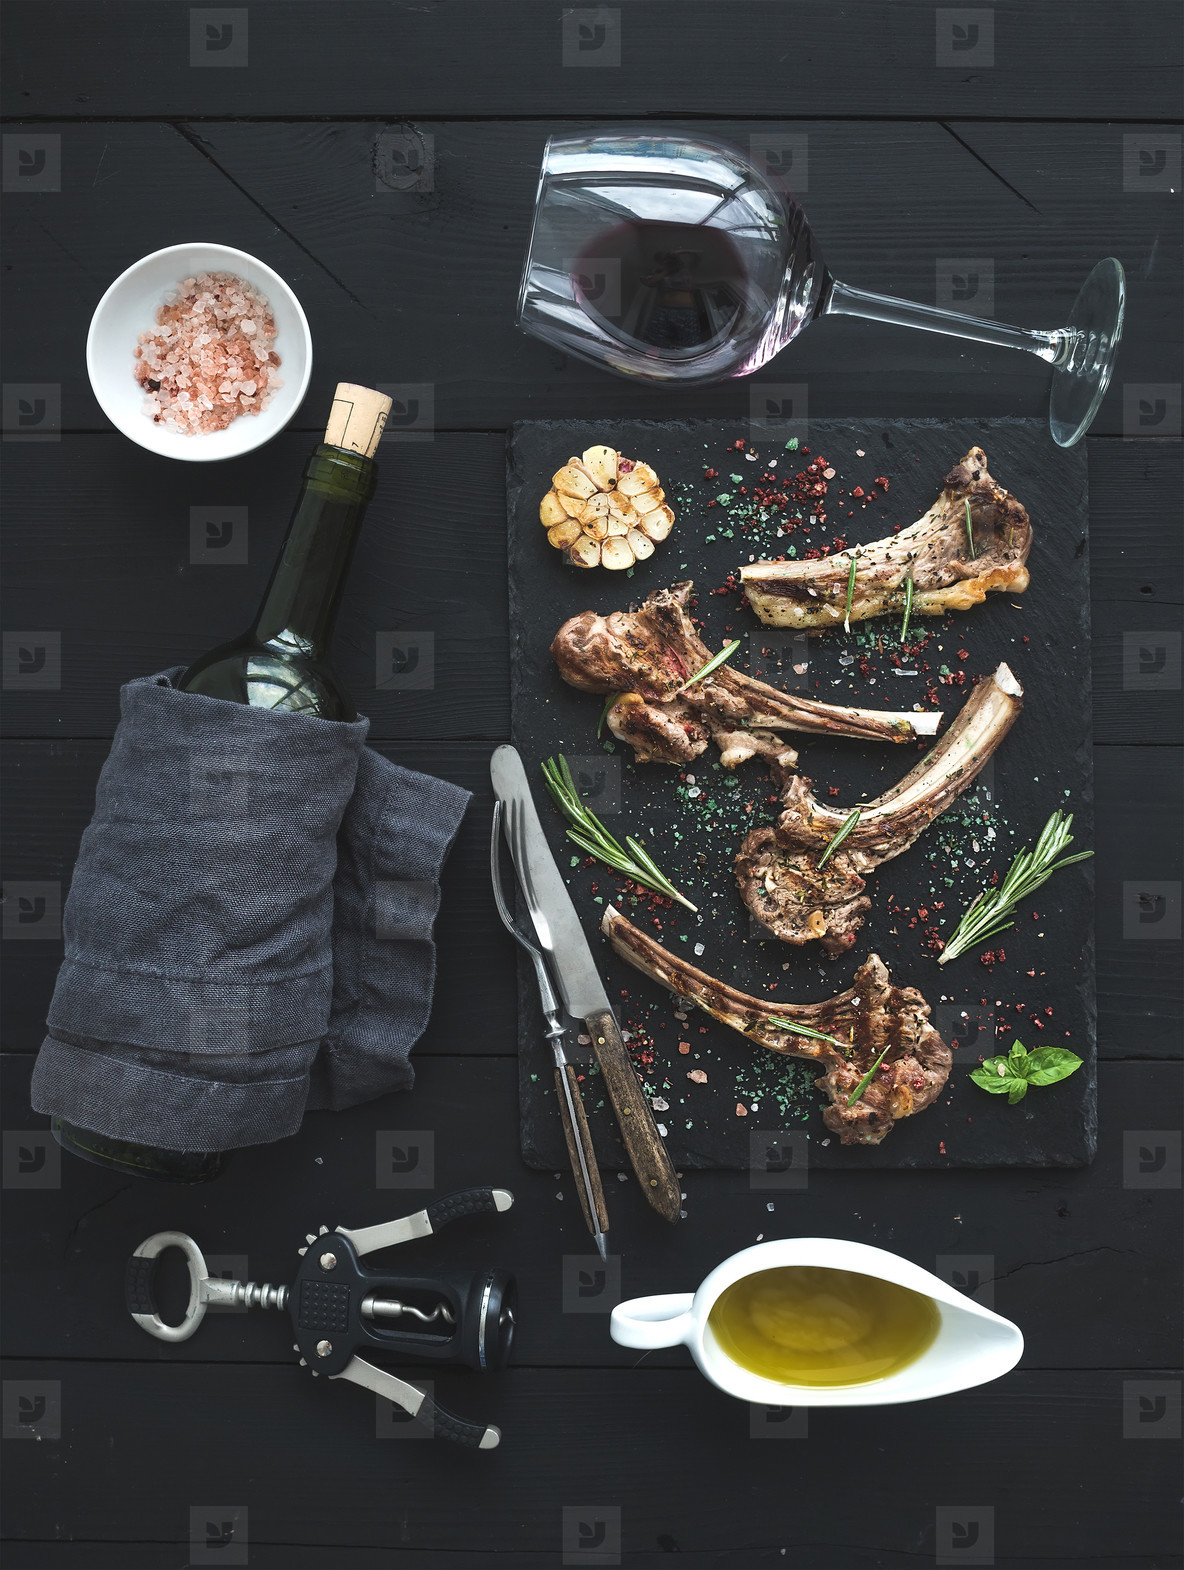 Grilled lamb chops. Rack of Lamb with garlic, rosemary, spices on slate tray, wine glass, oil in a saucer and bottle over black wood background